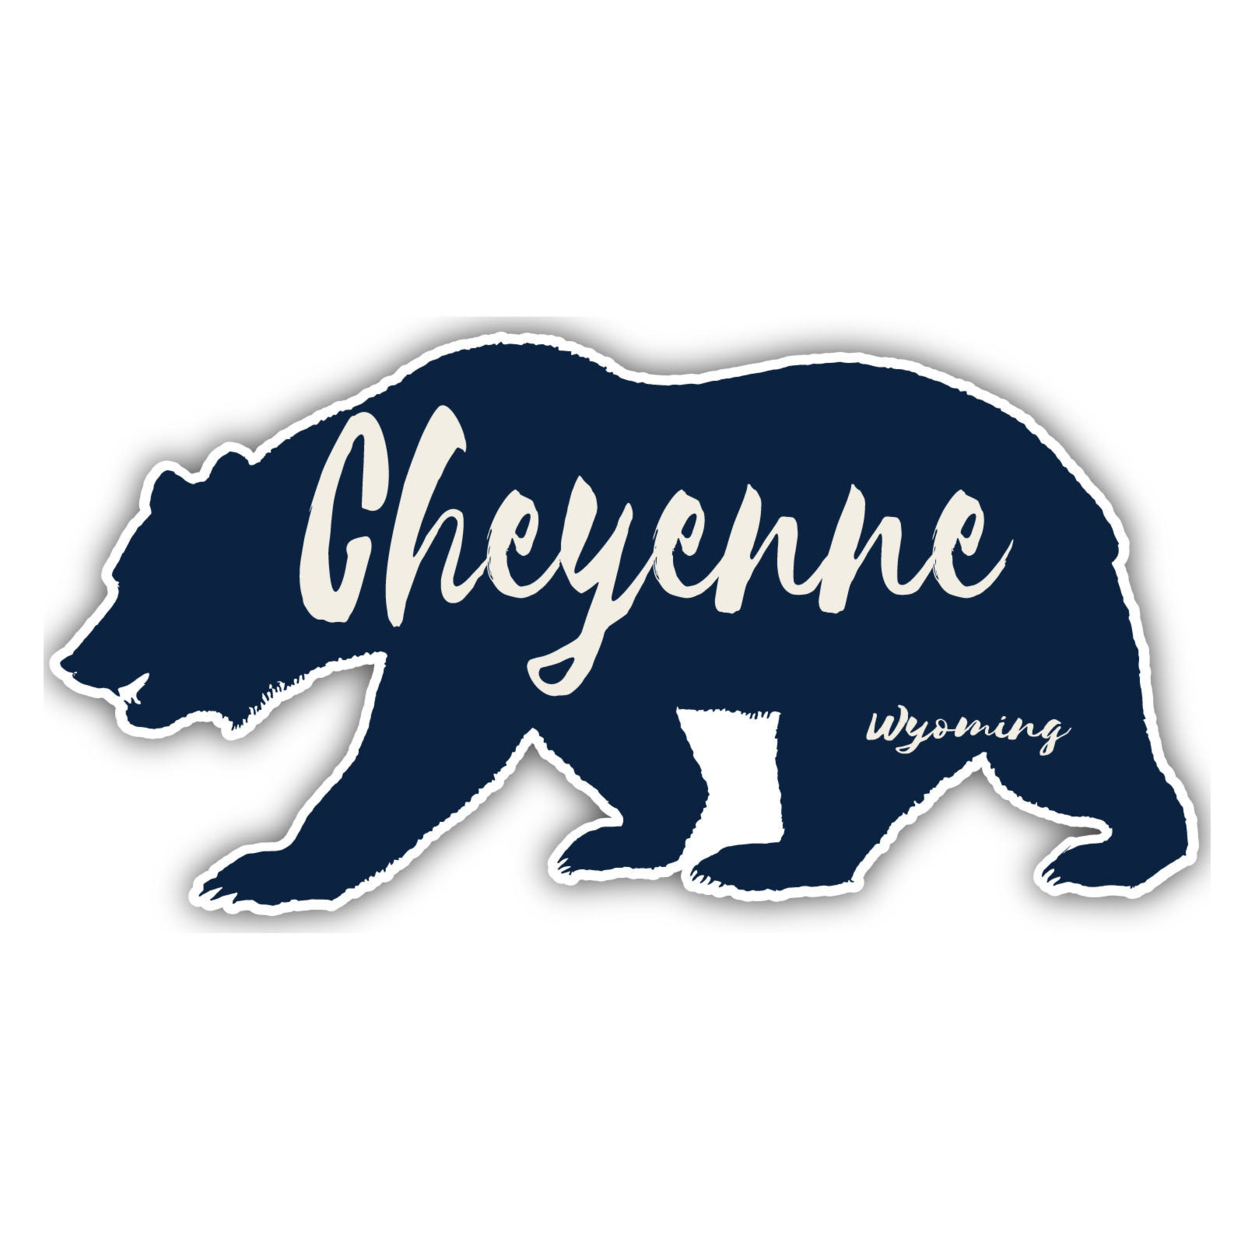 Cheyenne Wyoming Souvenir Decorative Stickers (Choose Theme And Size) - 4-Pack, 4-Inch, Camp Life